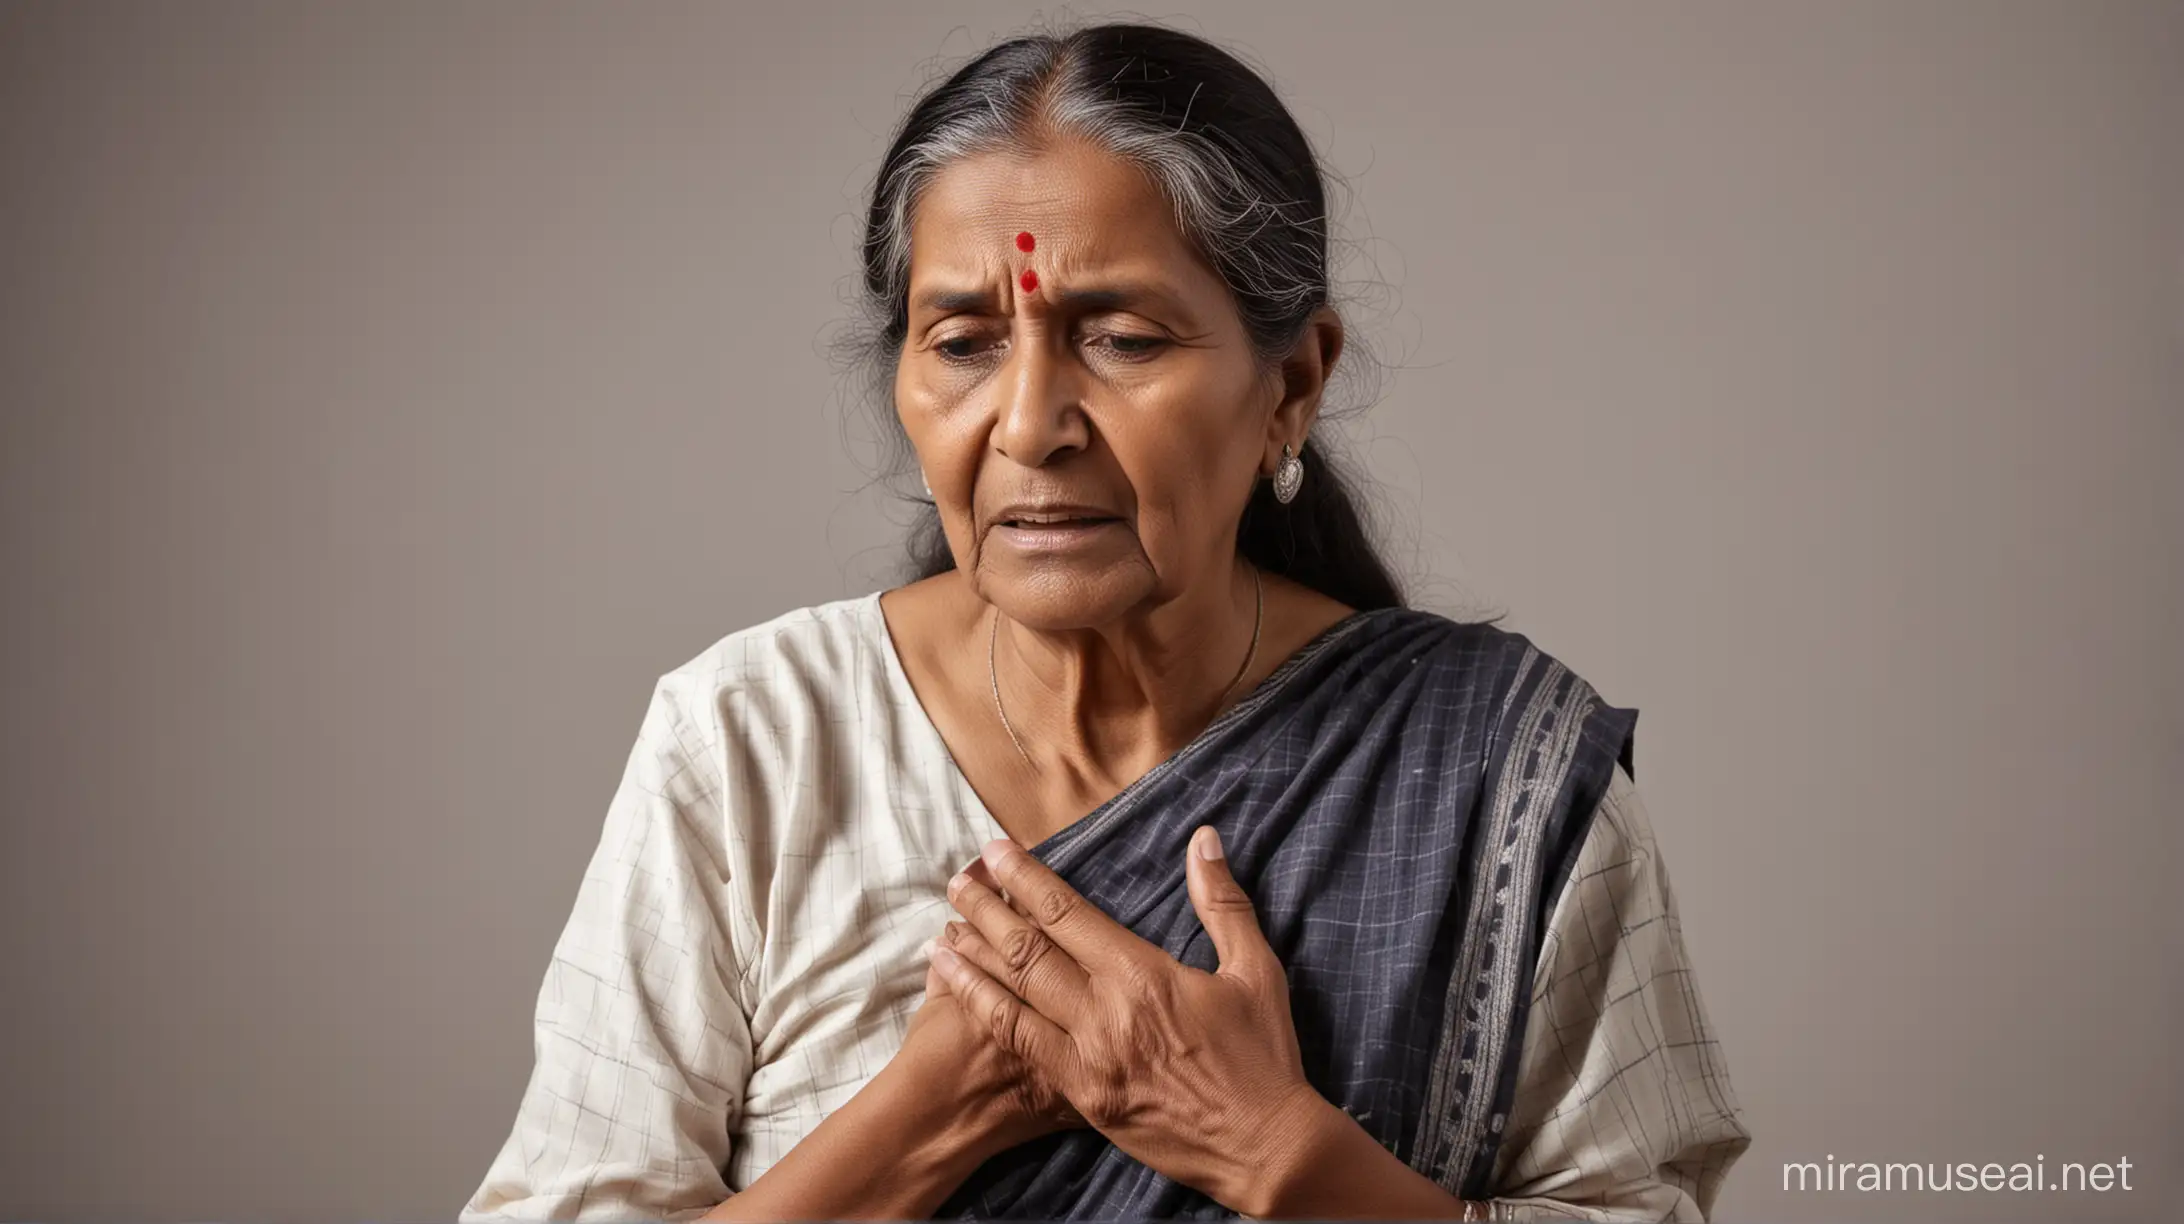 Elderly Indian Woman Experiencing Severe Chest Pain